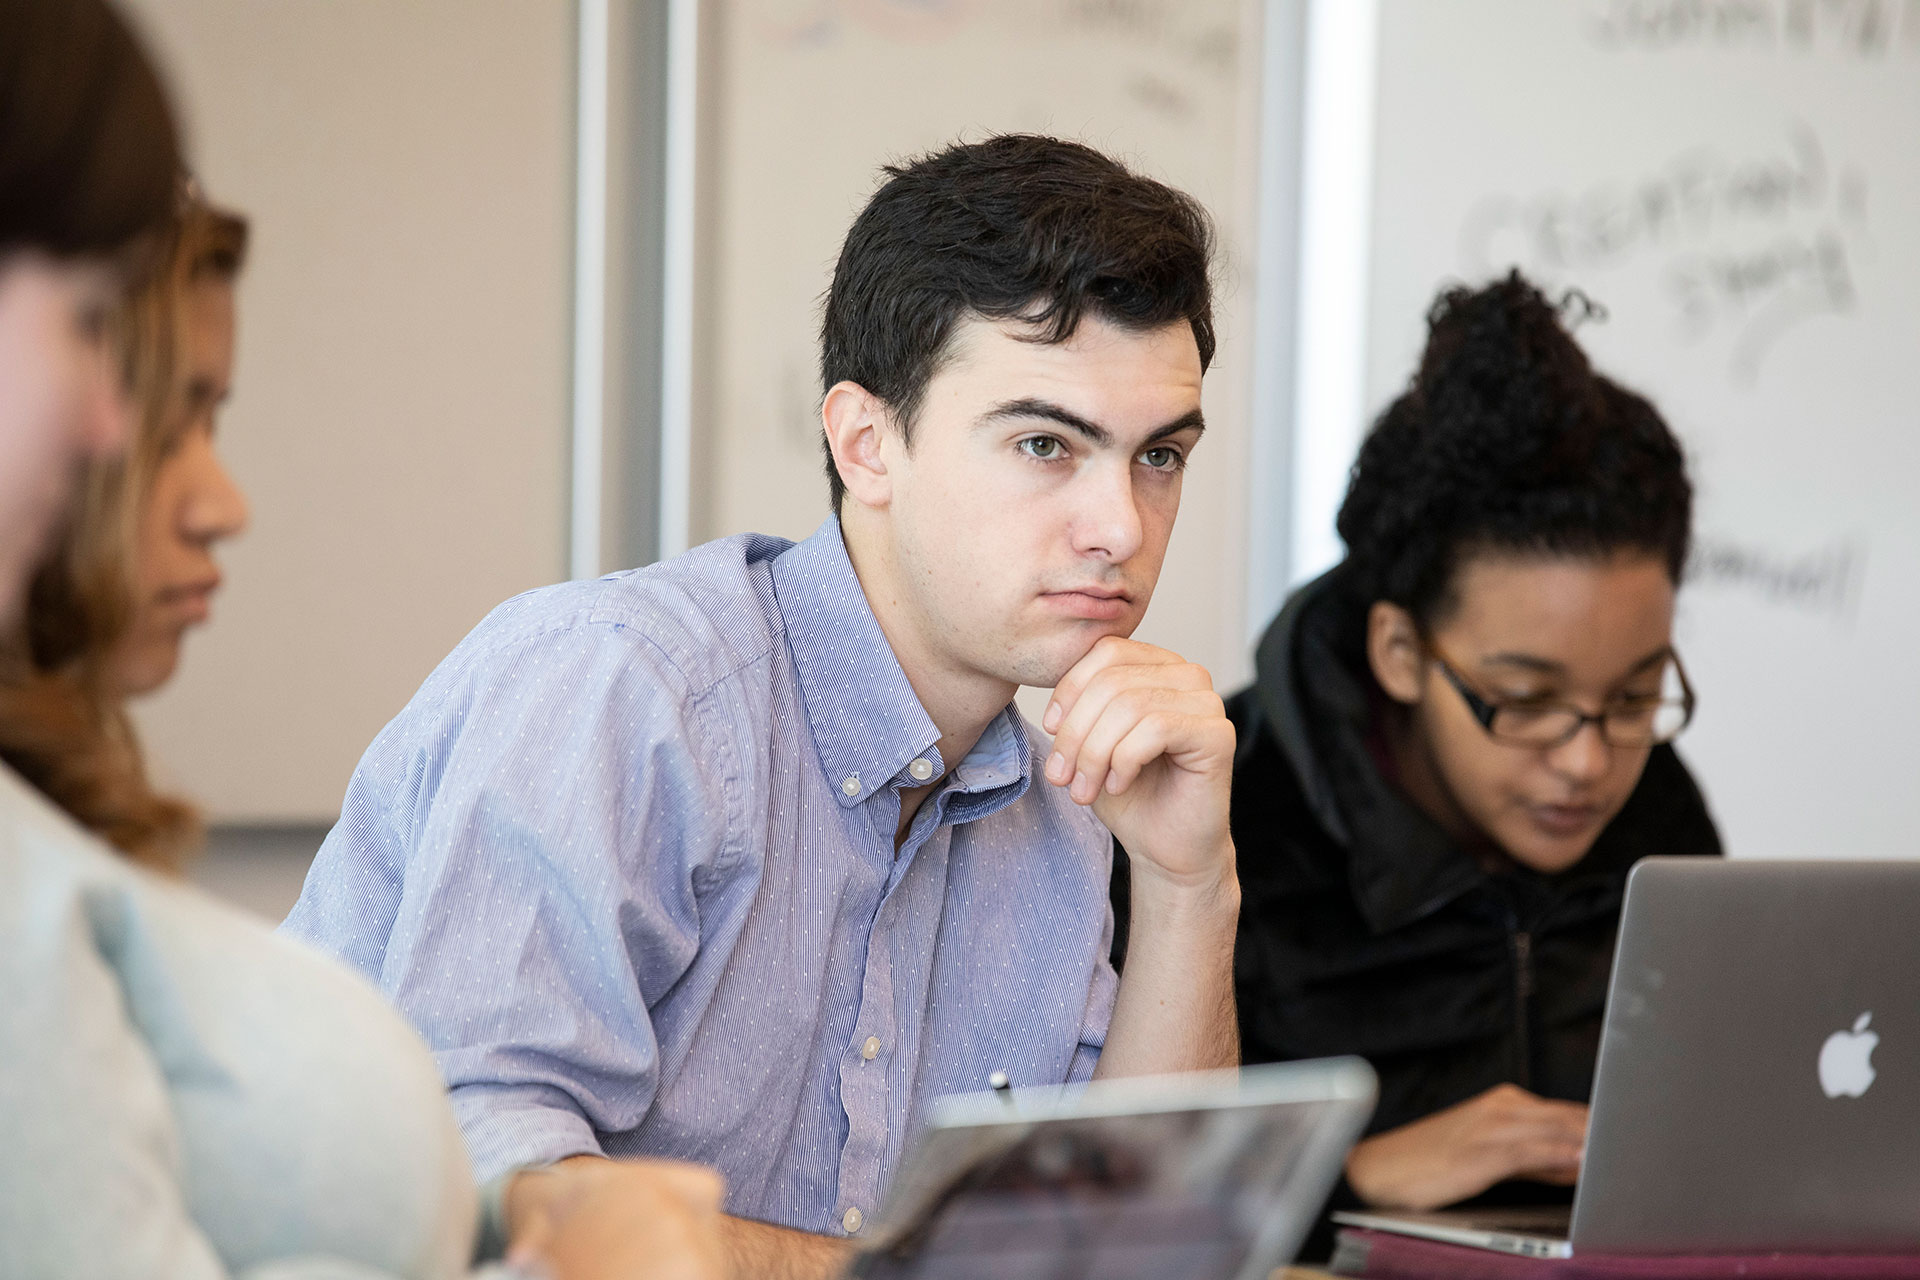 <b>Jonah Baca ’19</b> listens as a classmate discusses a description of Satan from Paradise Lost. Jared Richman’s class Frankenstein at 200 is investigating not just Mary Shelley’s classic but its influences and contemporaries such as this day’s discussion of Paradise Lost by John Milton.